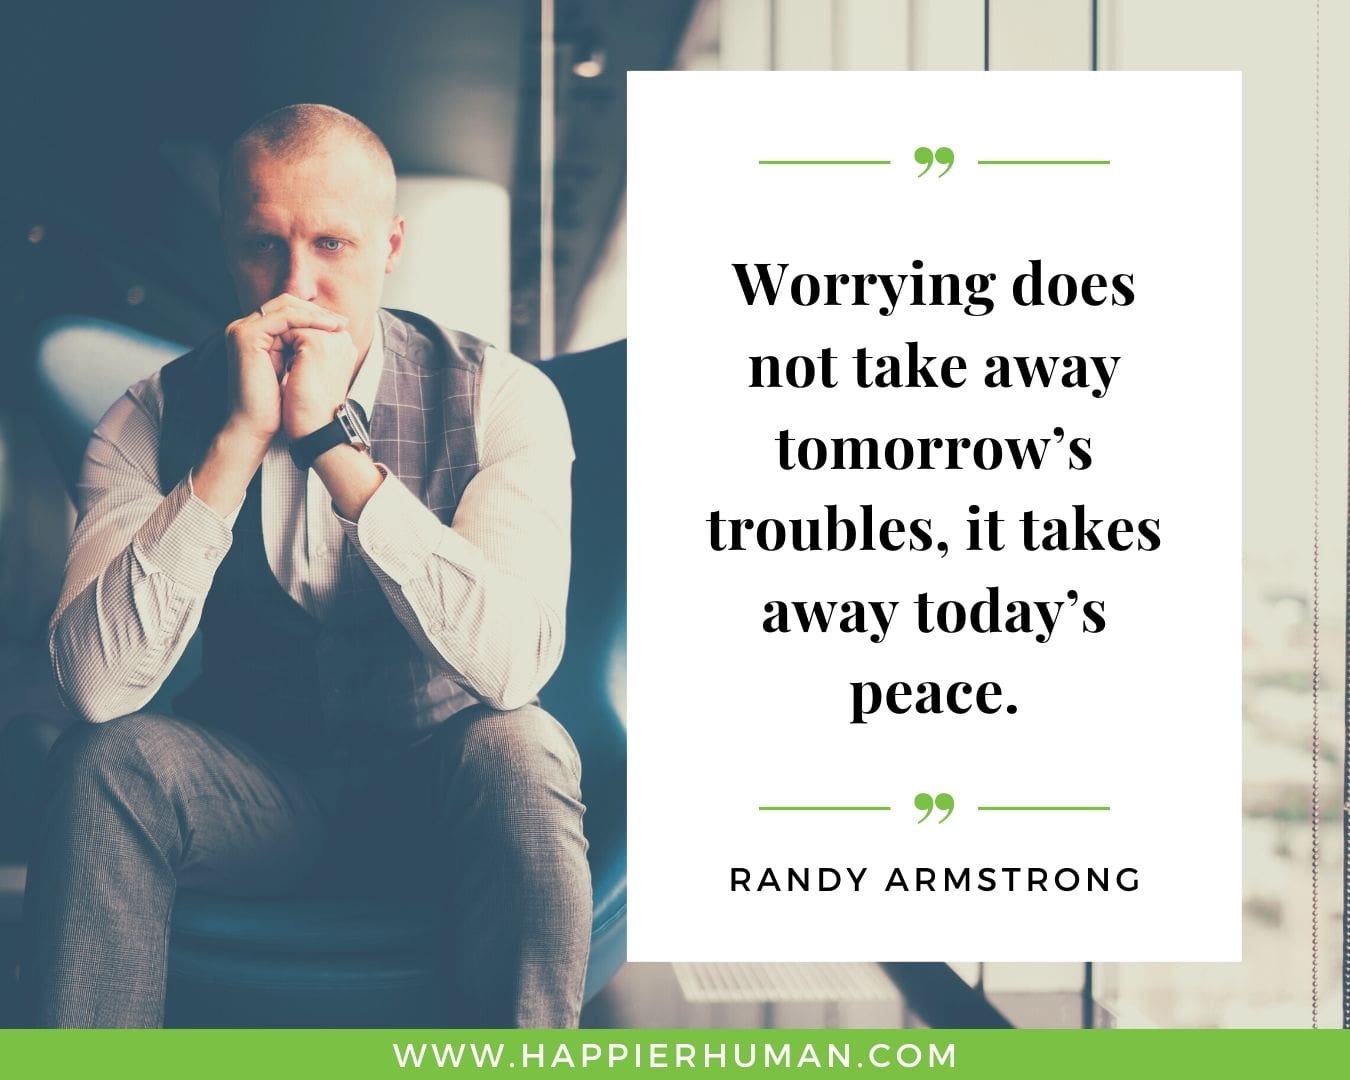 Overthinking Quotes - “Worrying does not take away tomorrow’s troubles, it takes away today’s peace.” - Randy Armstrong